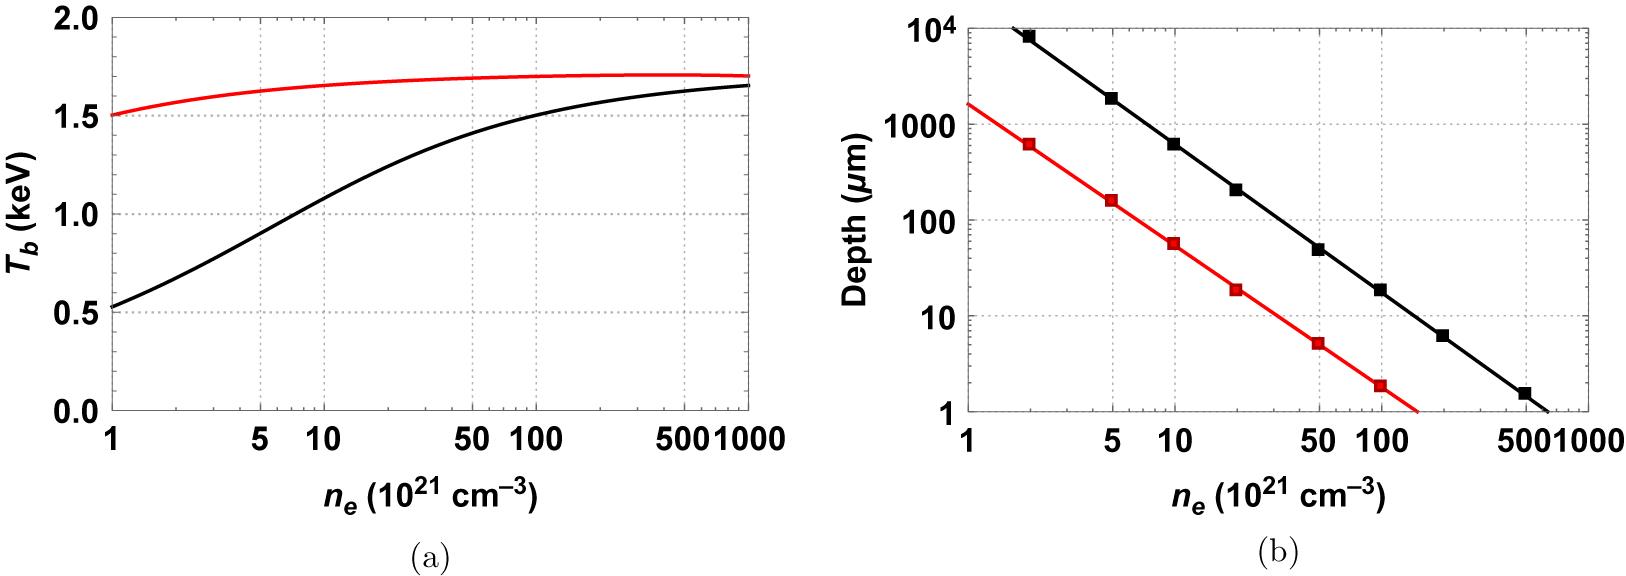 Heating of plasma with different densities by laser and Nd:YAG laser with , ns and keV. (a) Plasma temperature at the vacuum–plasma boundary versus plasma density: , T (black) and , T (red). (b) Averaged heating depth versus plasma density: , T (black) and , T (red), where the dots denote simulated depth and the lines denote the fitted curve.